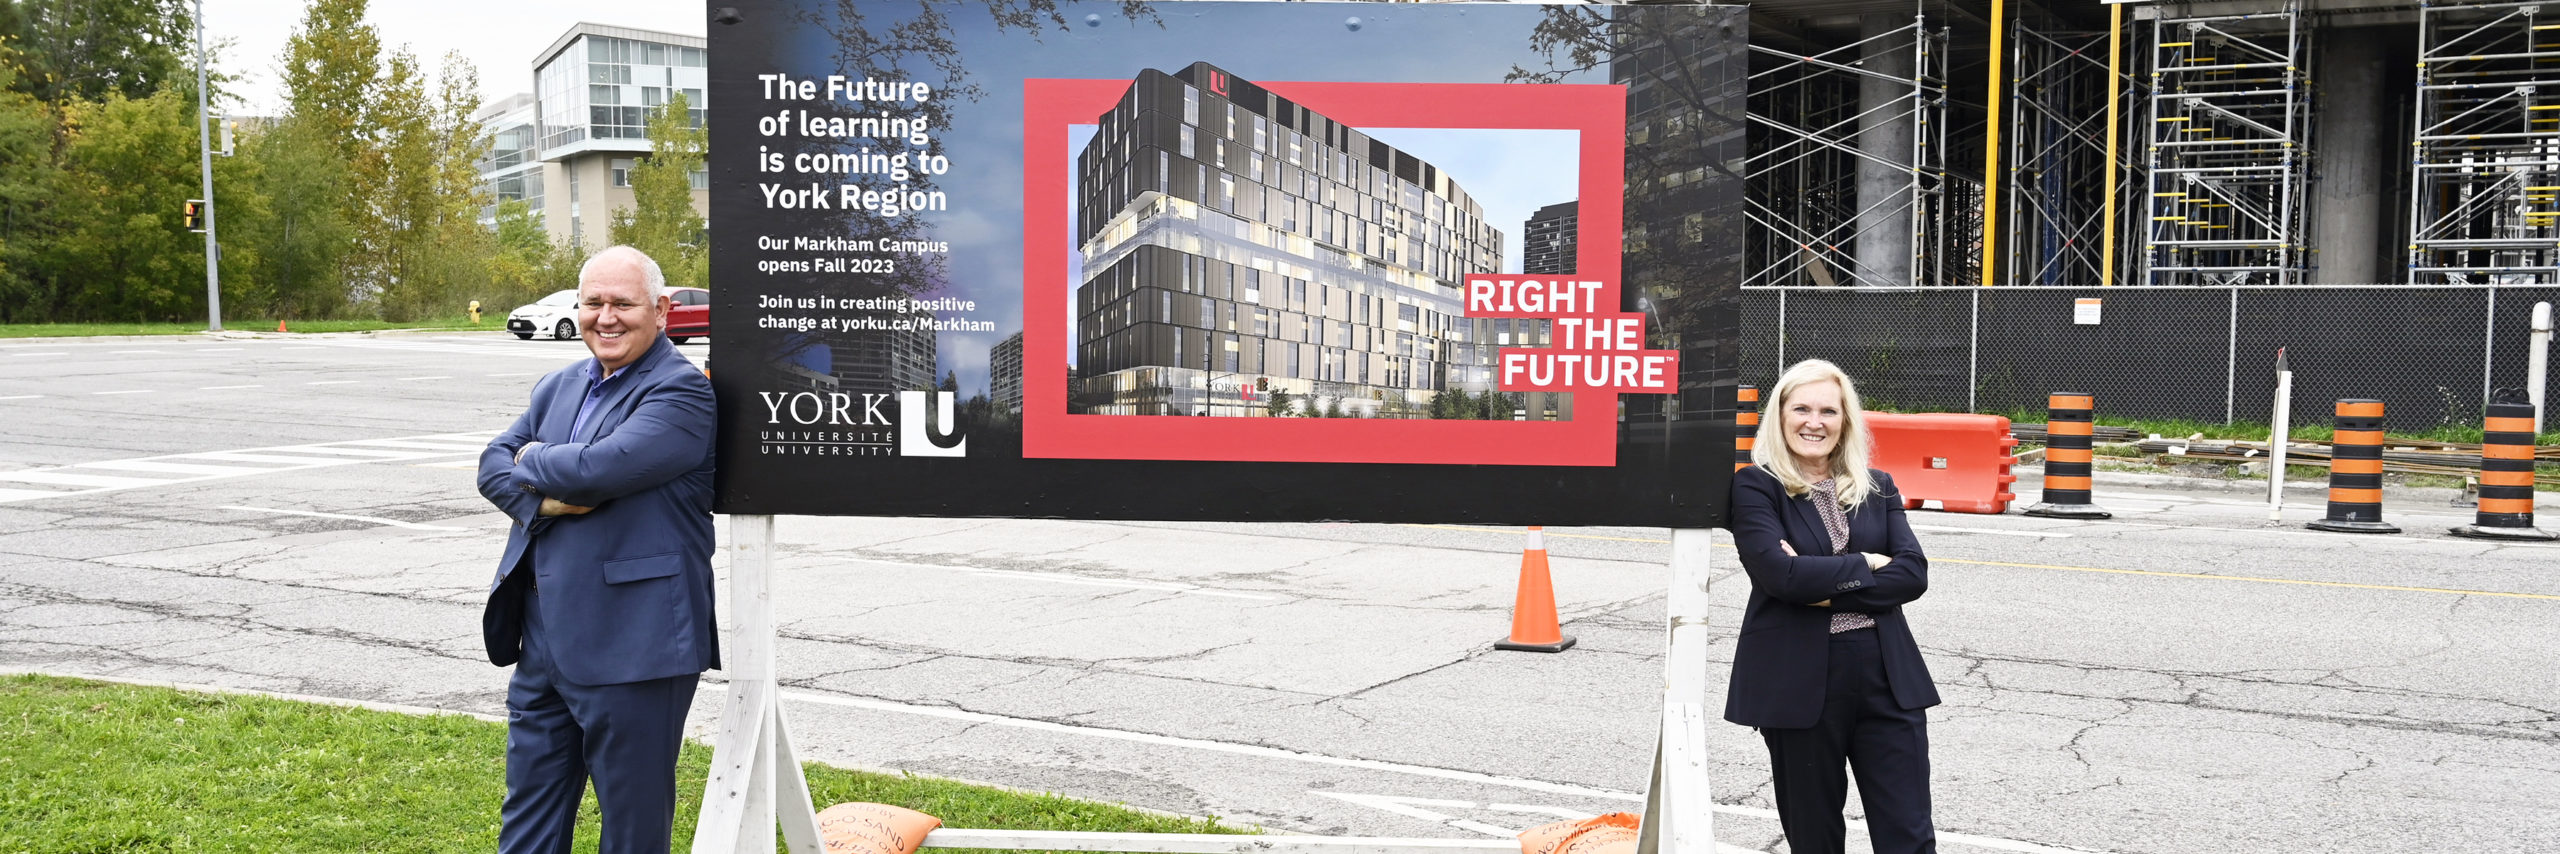 York University Boulevard unveiling during event at the Markham Campus